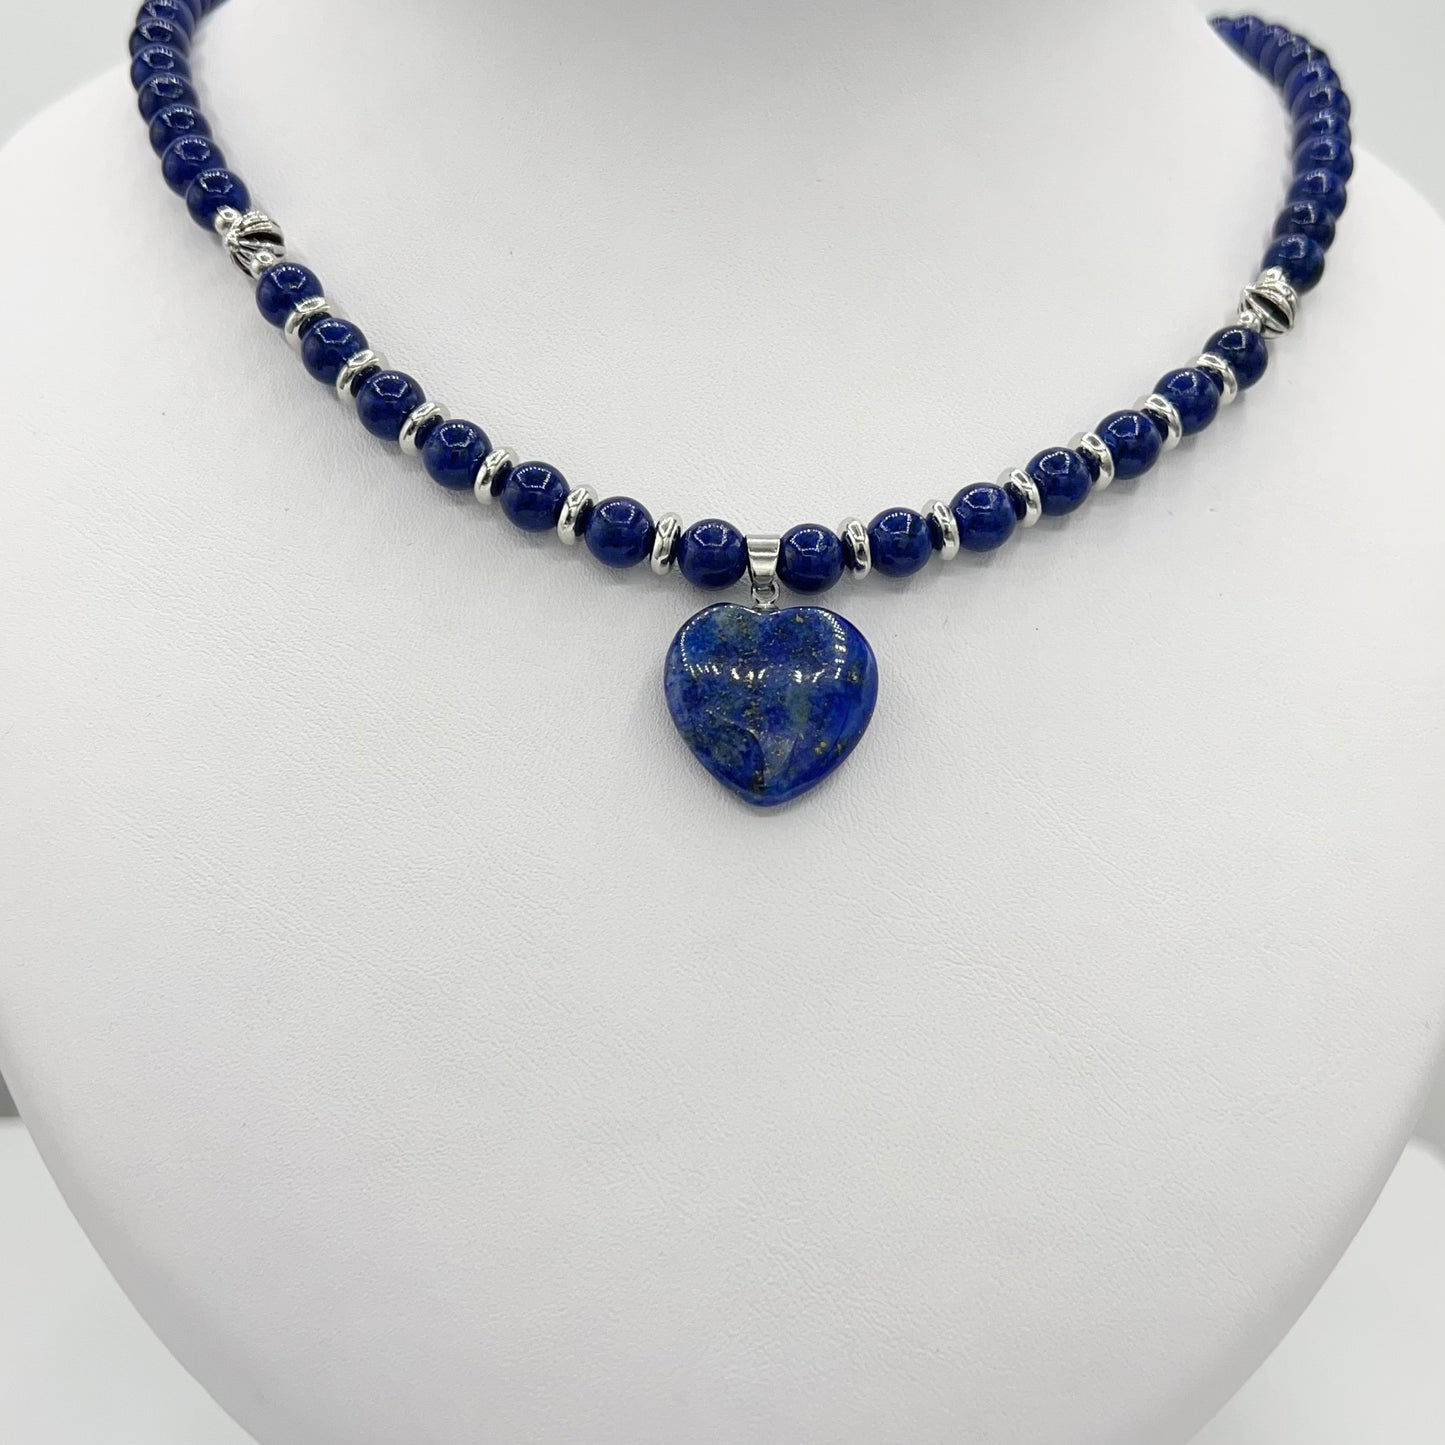 Natural Blue Lapis Lazuli Necklace With Heart Pendant Silver